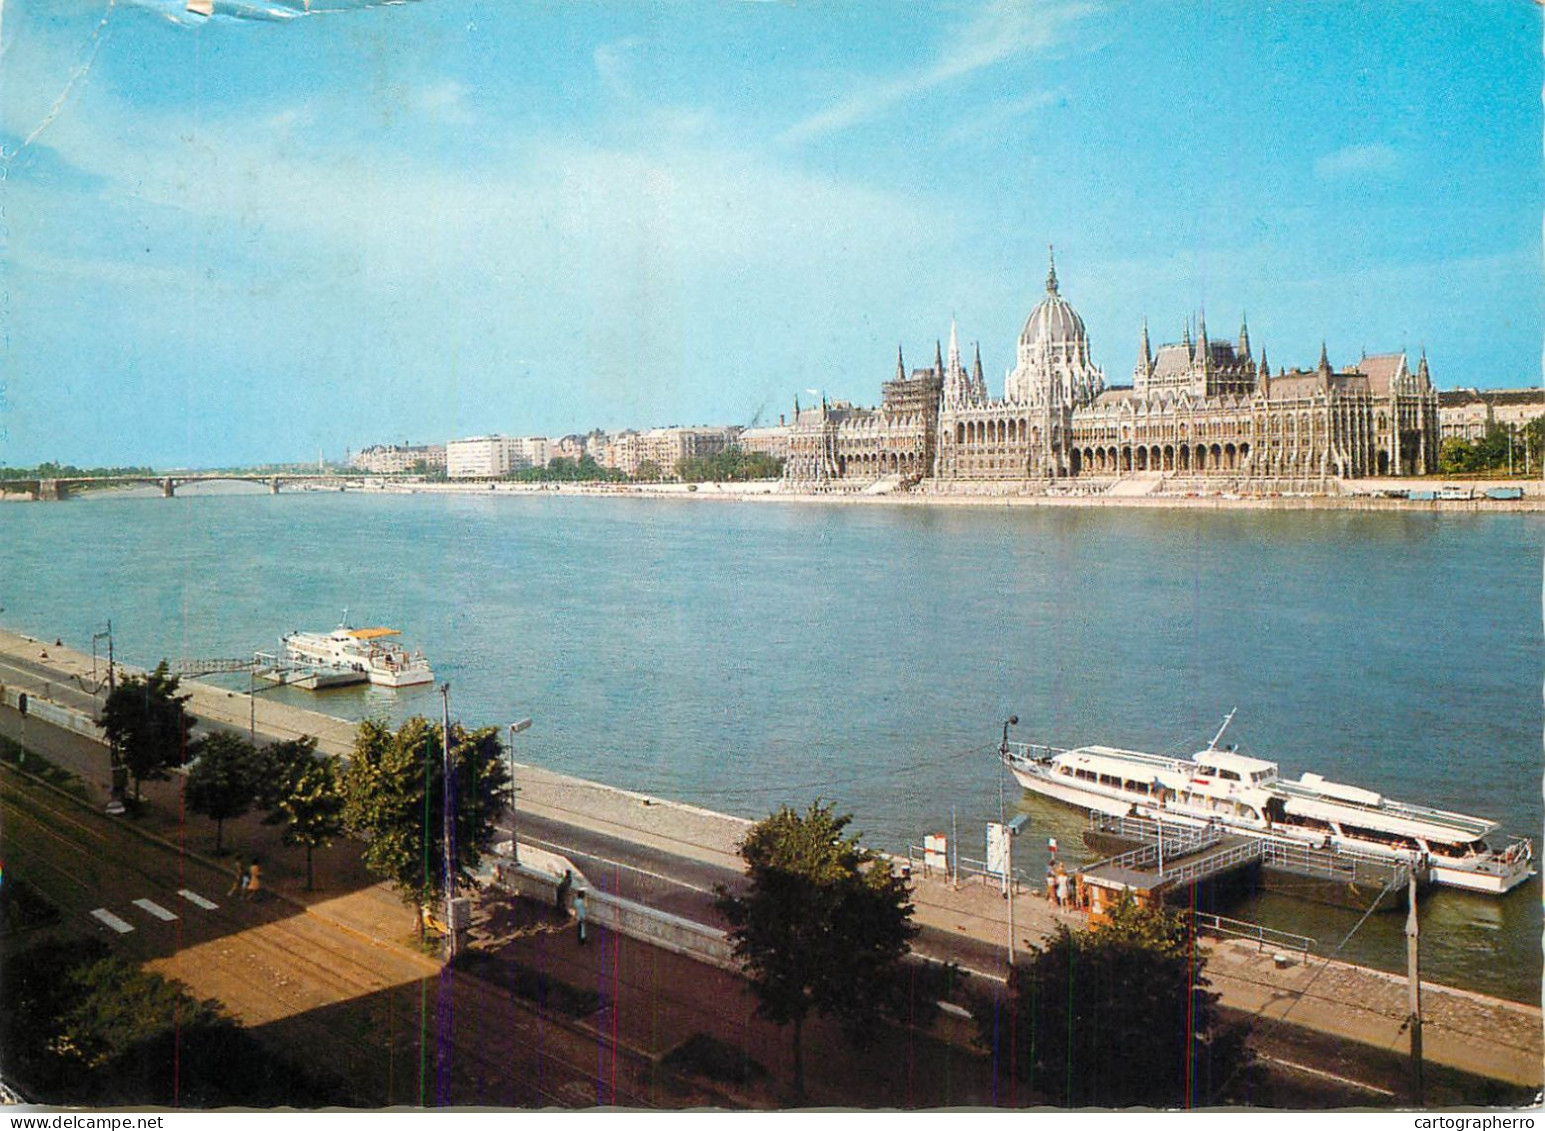 Navigation Sailing Vessels & Boats Themed Postcard Hungary Budapest Danube Cruise Vessel - Voiliers